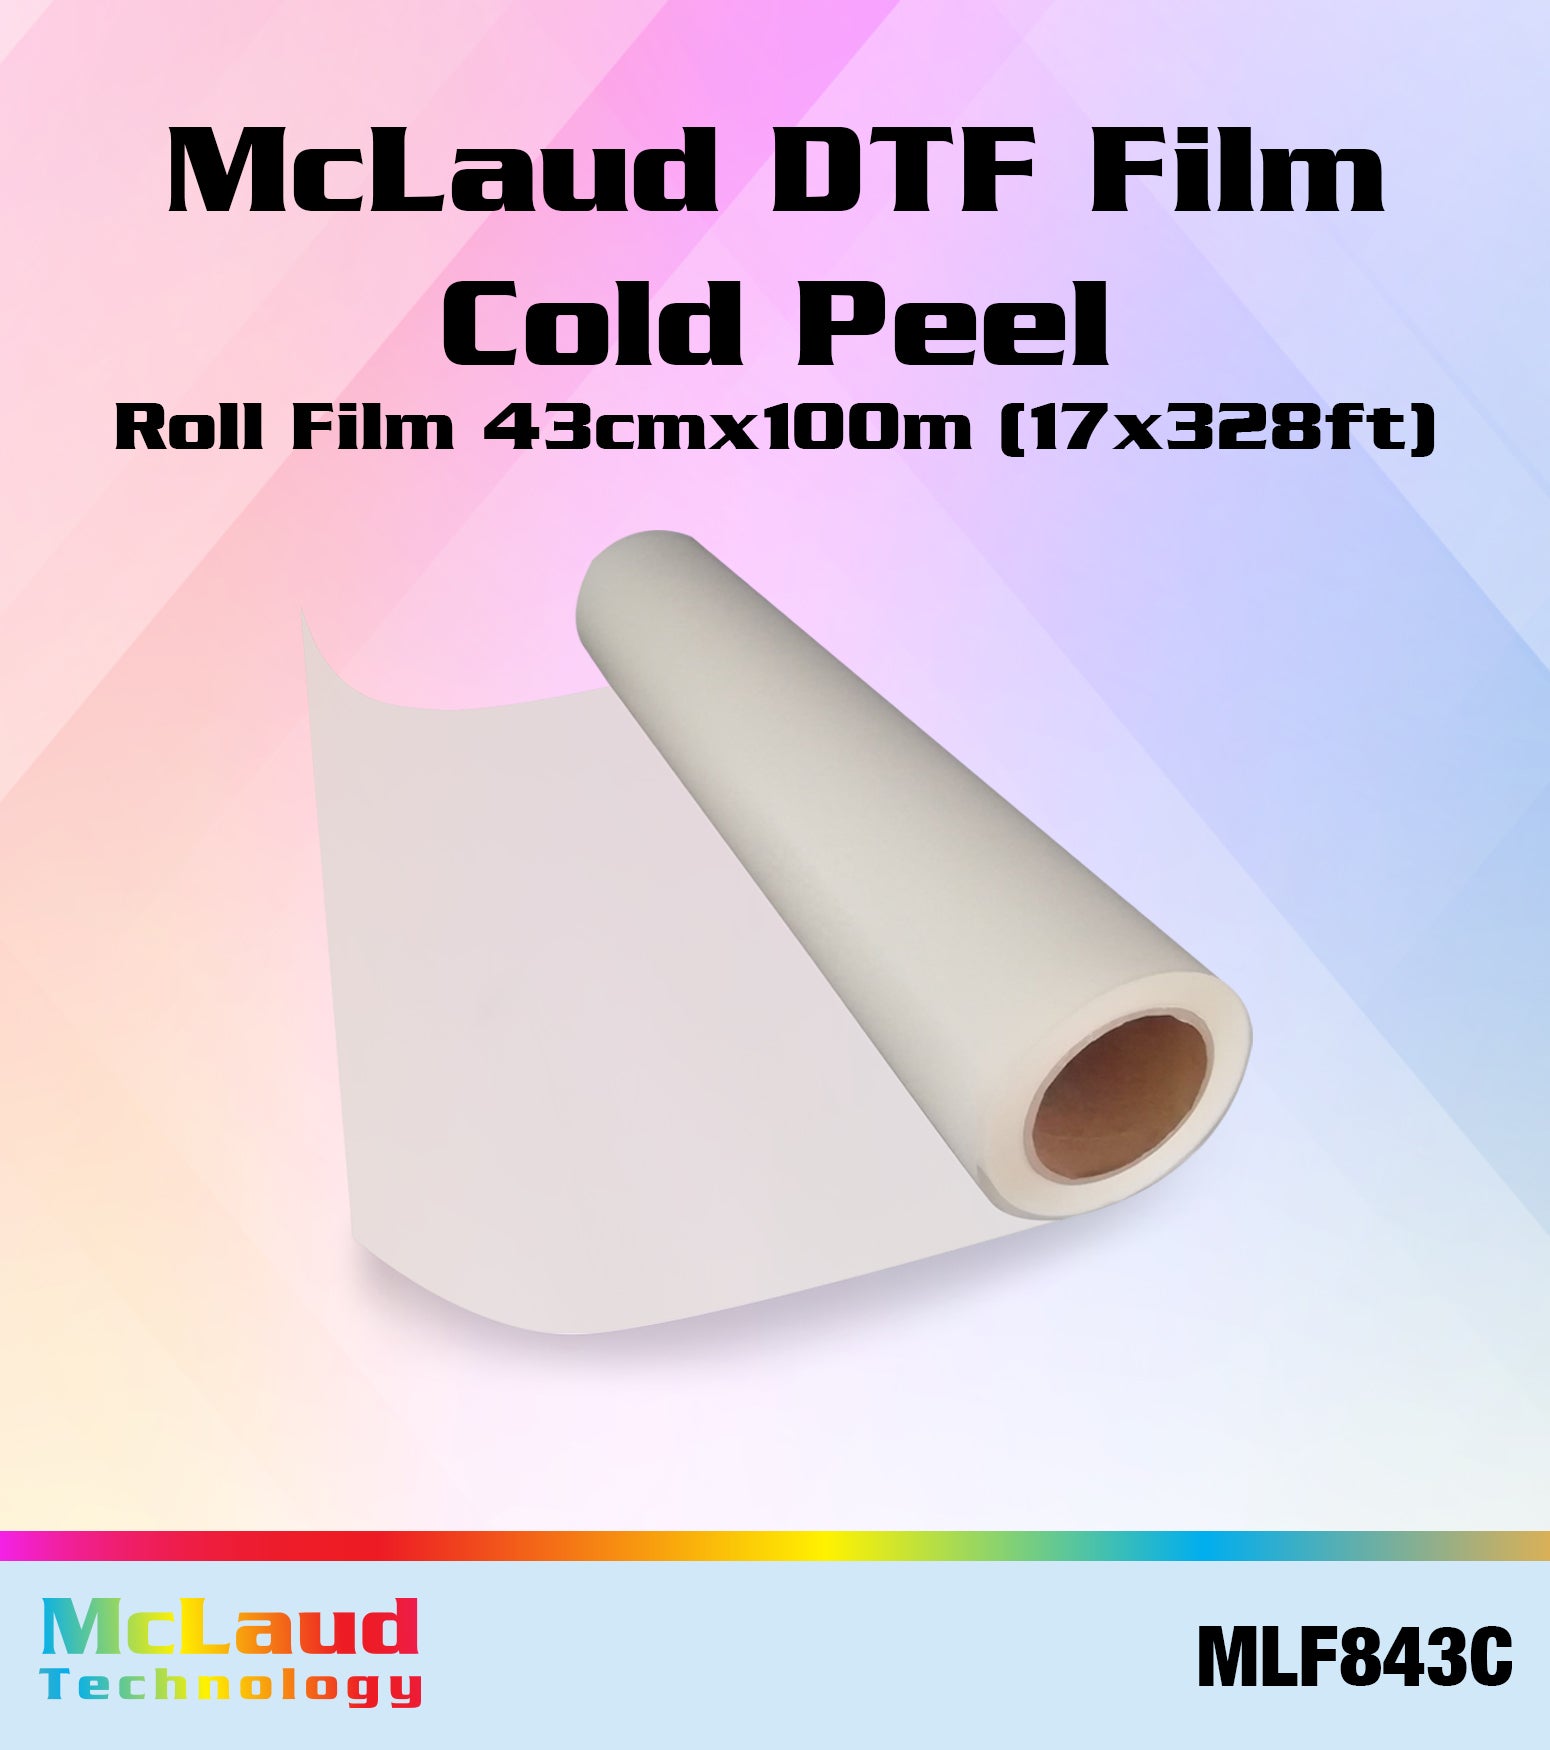 McLaud DTF Film A3 (11.75 x 16.5 inch) – McLaud Technology